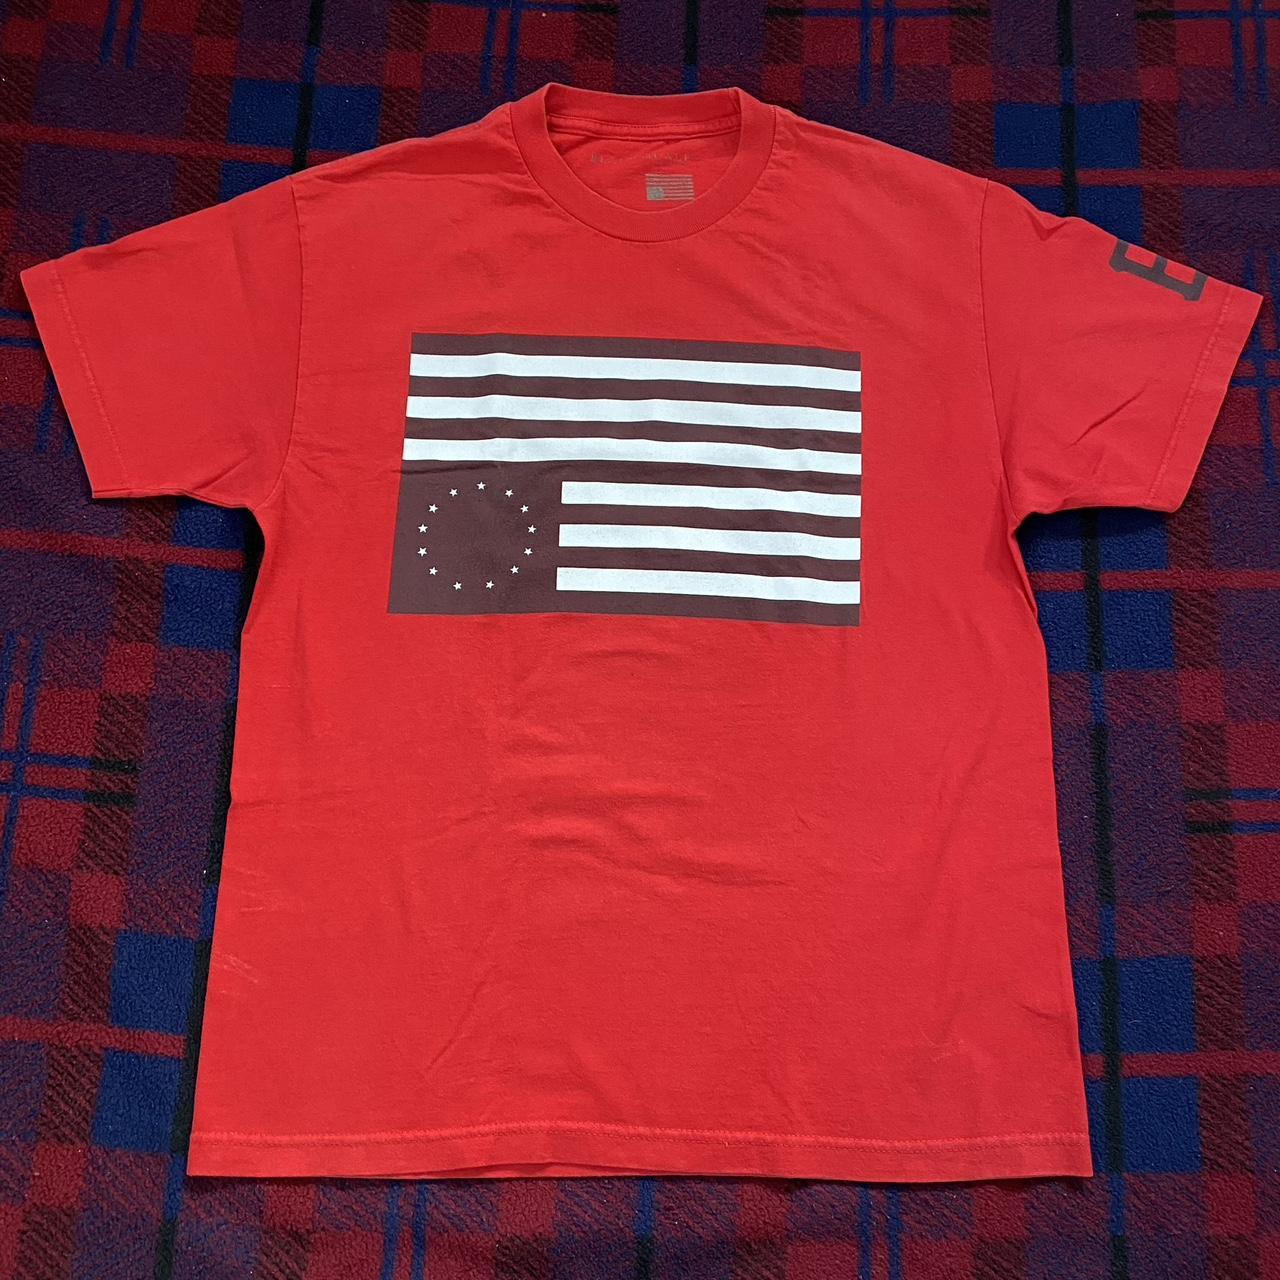 item listed by missionpeakthrift